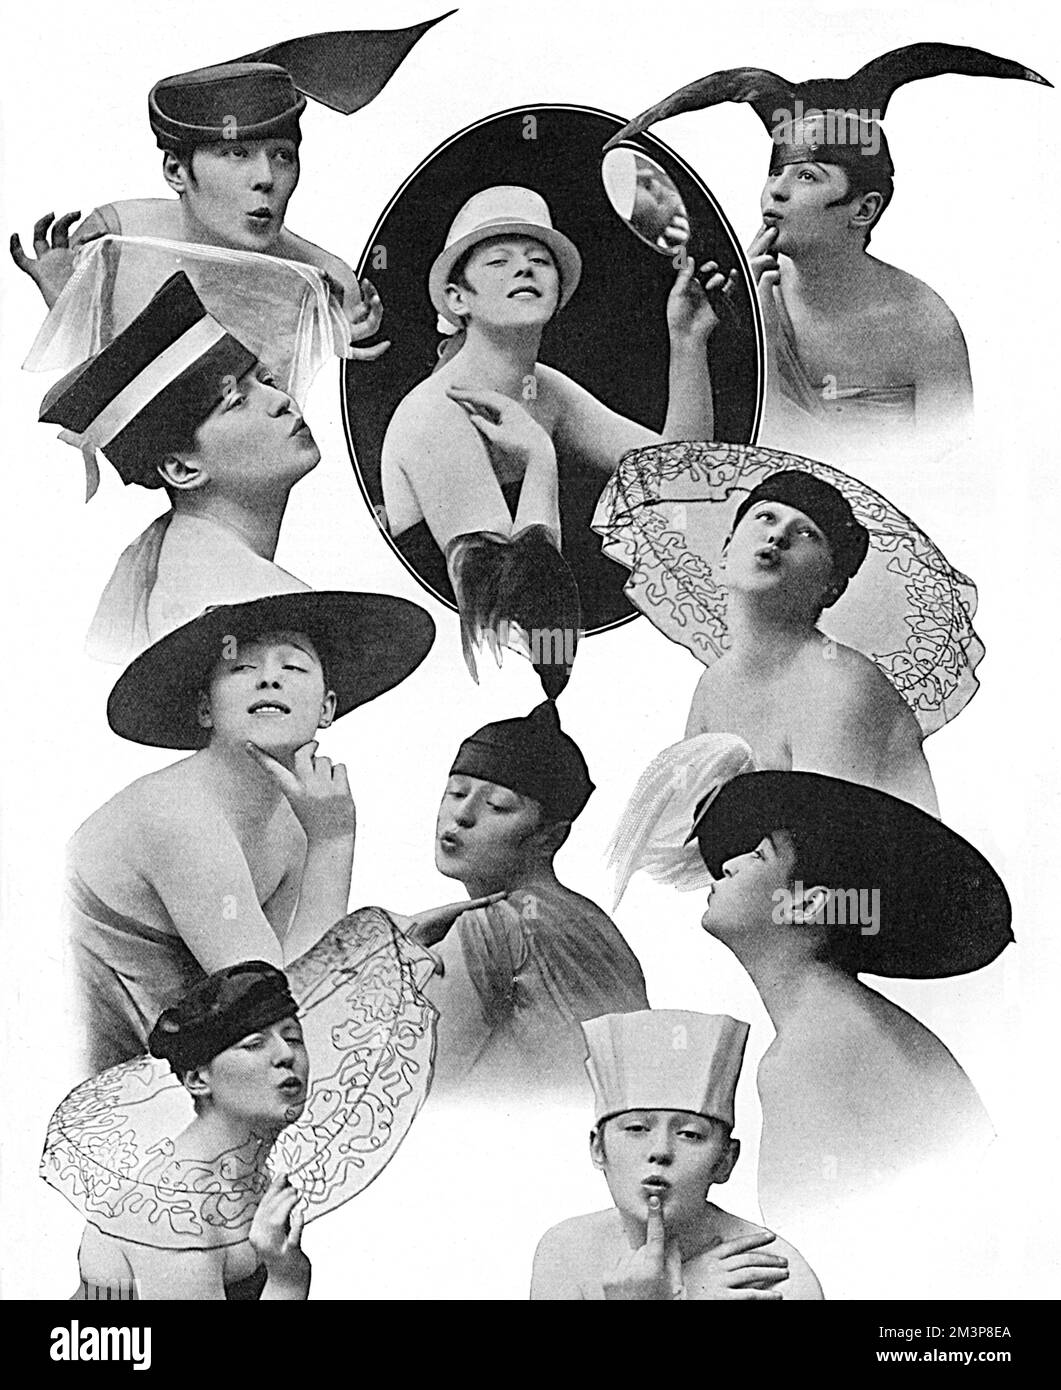 A variety of flamboyant and quirky hat designs available from Maison Lewis, inspired by the character Eve, The Tatler magazine's fictional gossip columnist, whose fame extended to her having her own sketch in the revue, 'Tina' at the Adelphi in 1916, where Phyllis Dare and the rest of the cast, wore a variety of stylised costumes based on Eve's wardrobe.  1916 Stock Photo